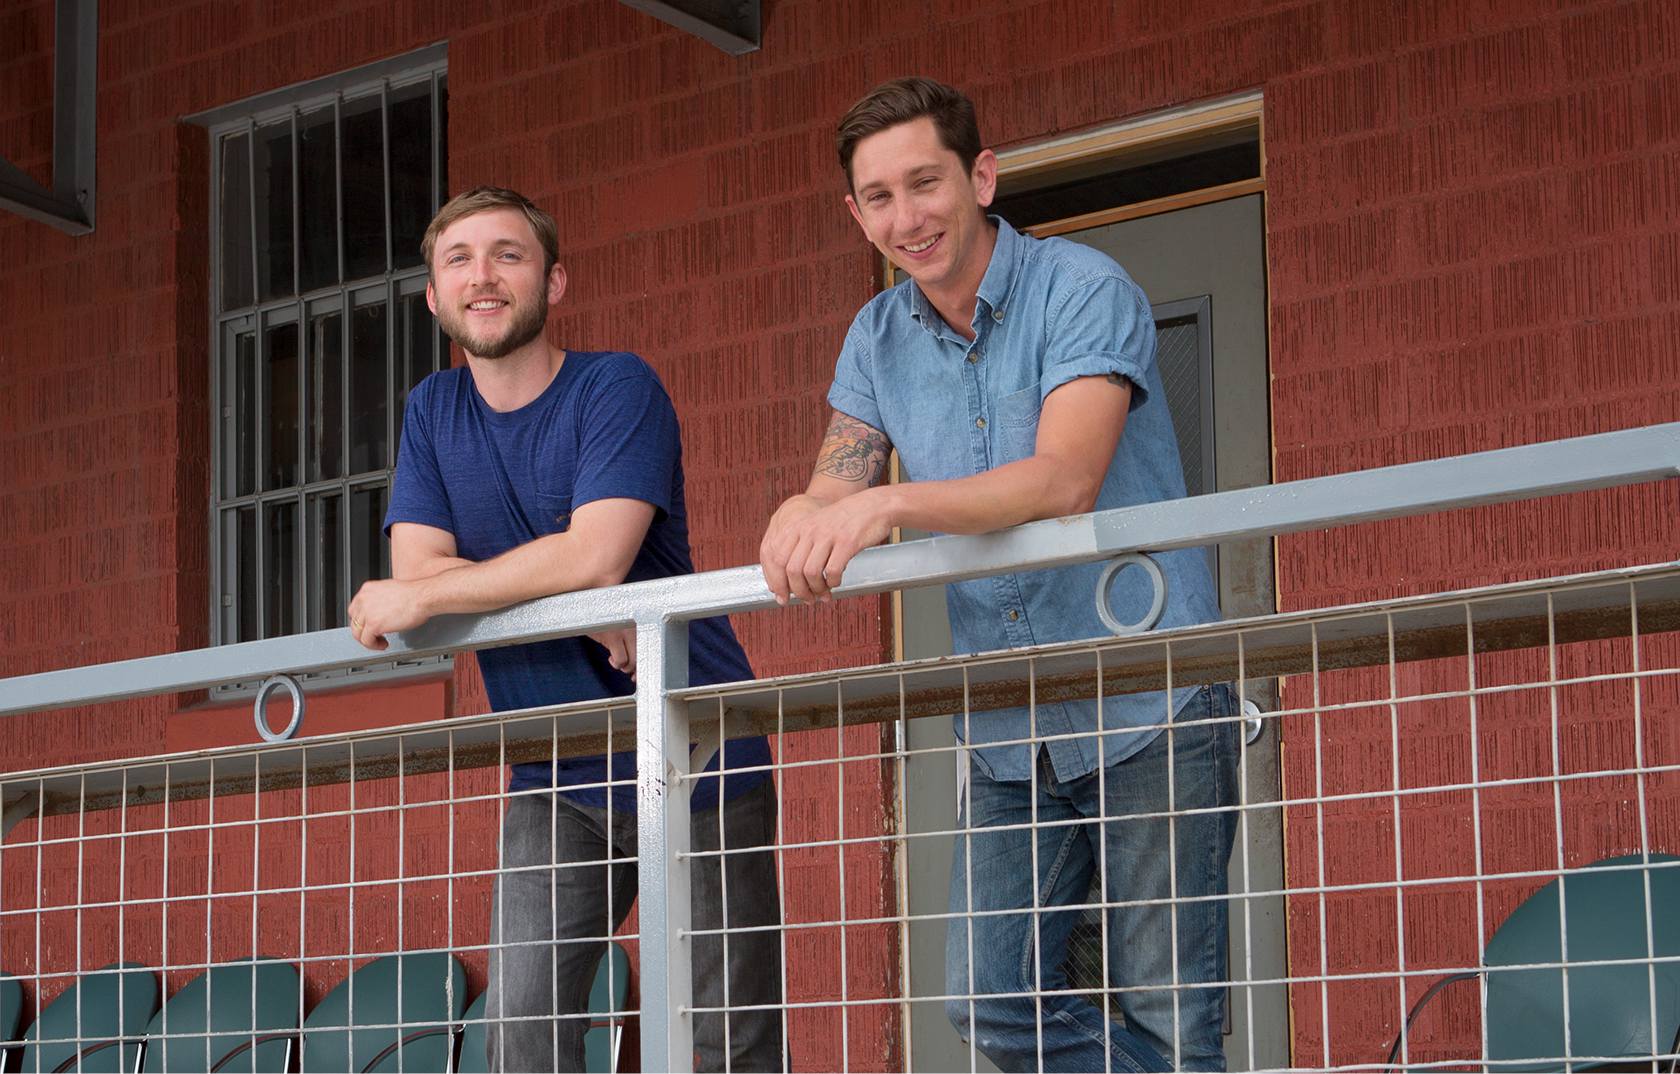 Two men smiling and leaning on a railing